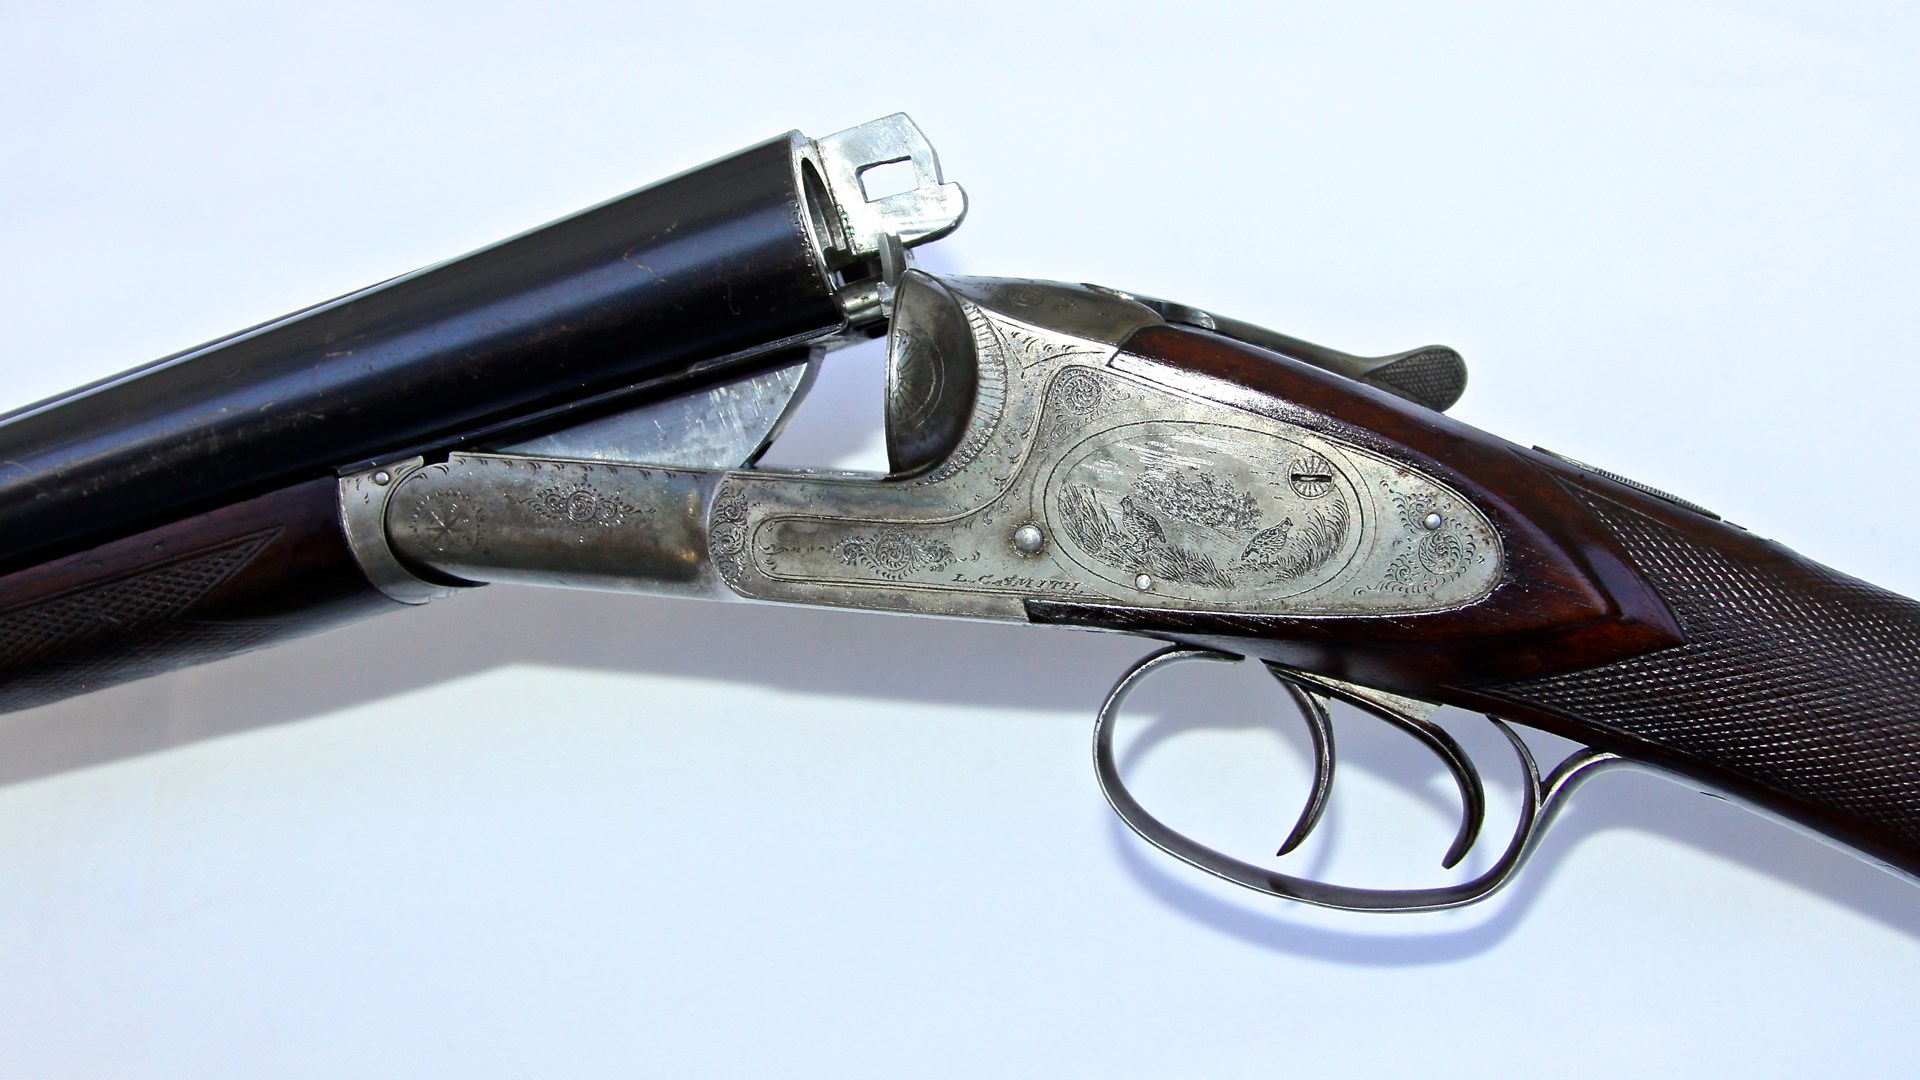 The L.C. Smith was America’s only authentic sidelock. Hacker’s No. 3E “Elsie” was made in 1902 and features hand-engraved game birds and precise wood-to-metal inletting